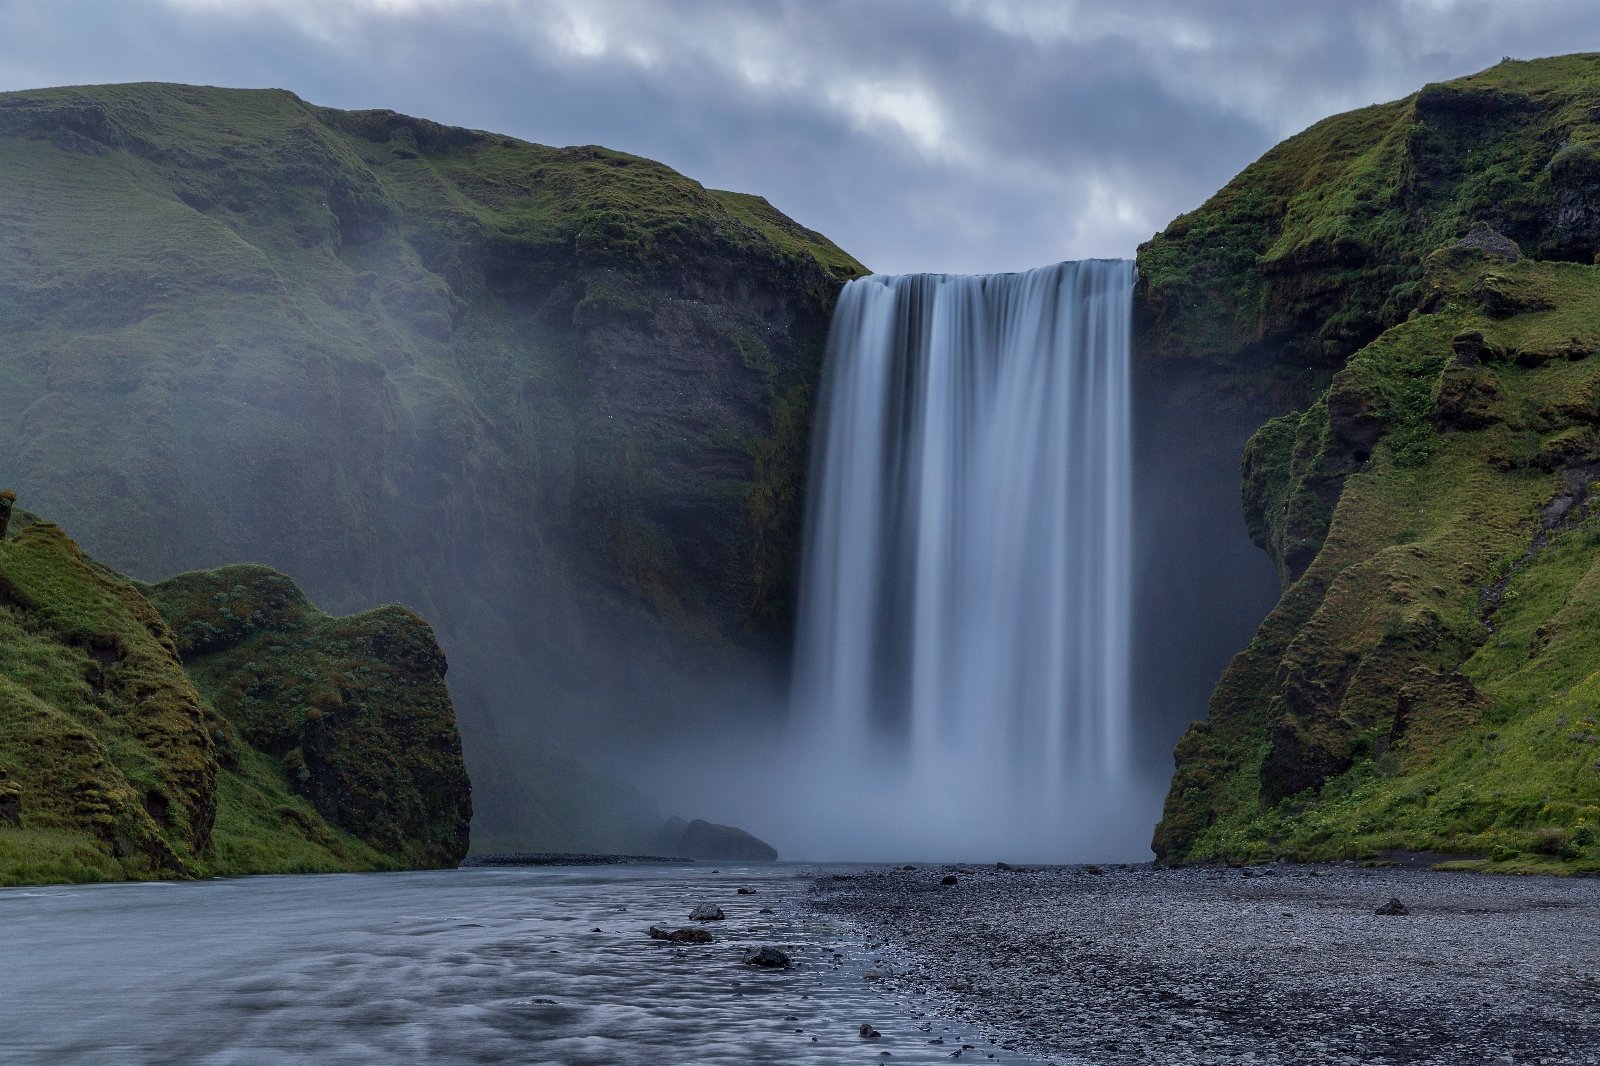 Image of Skógafoss Waterfall by Jeff Martin